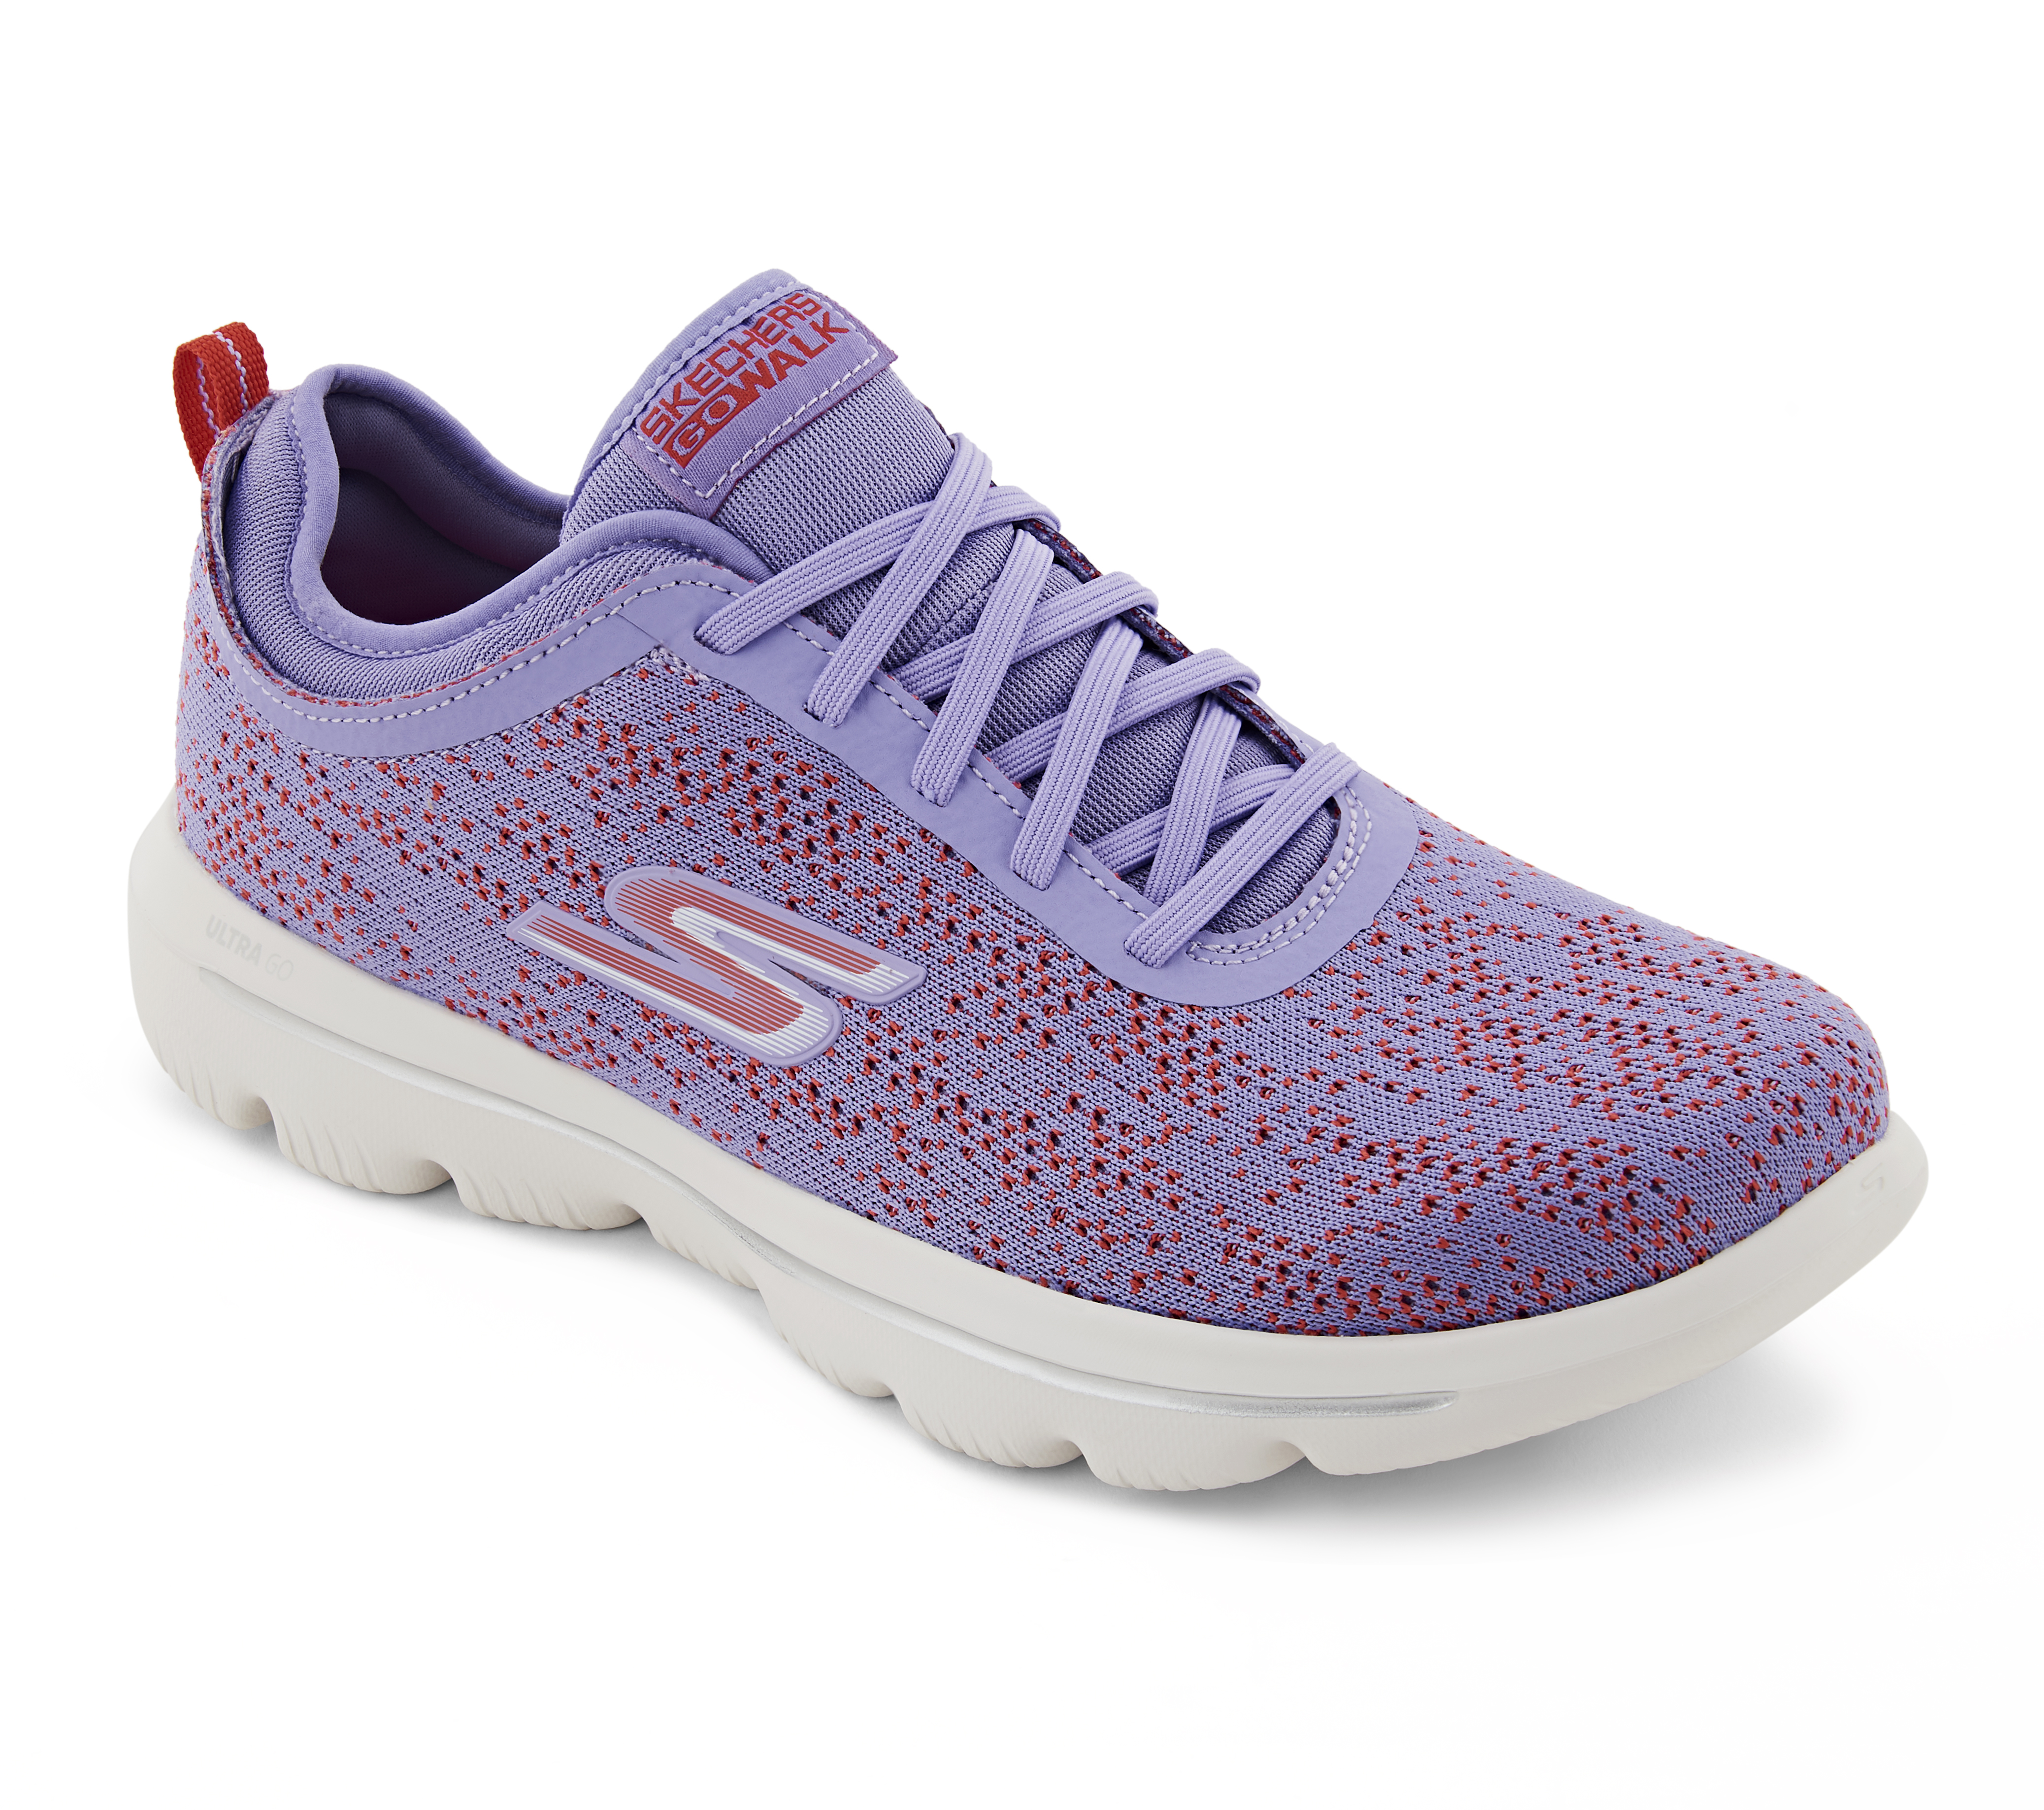 Skechers Walk Evolution Ultra Mirab Lace Up Shoes For Women - Style 15736 | India